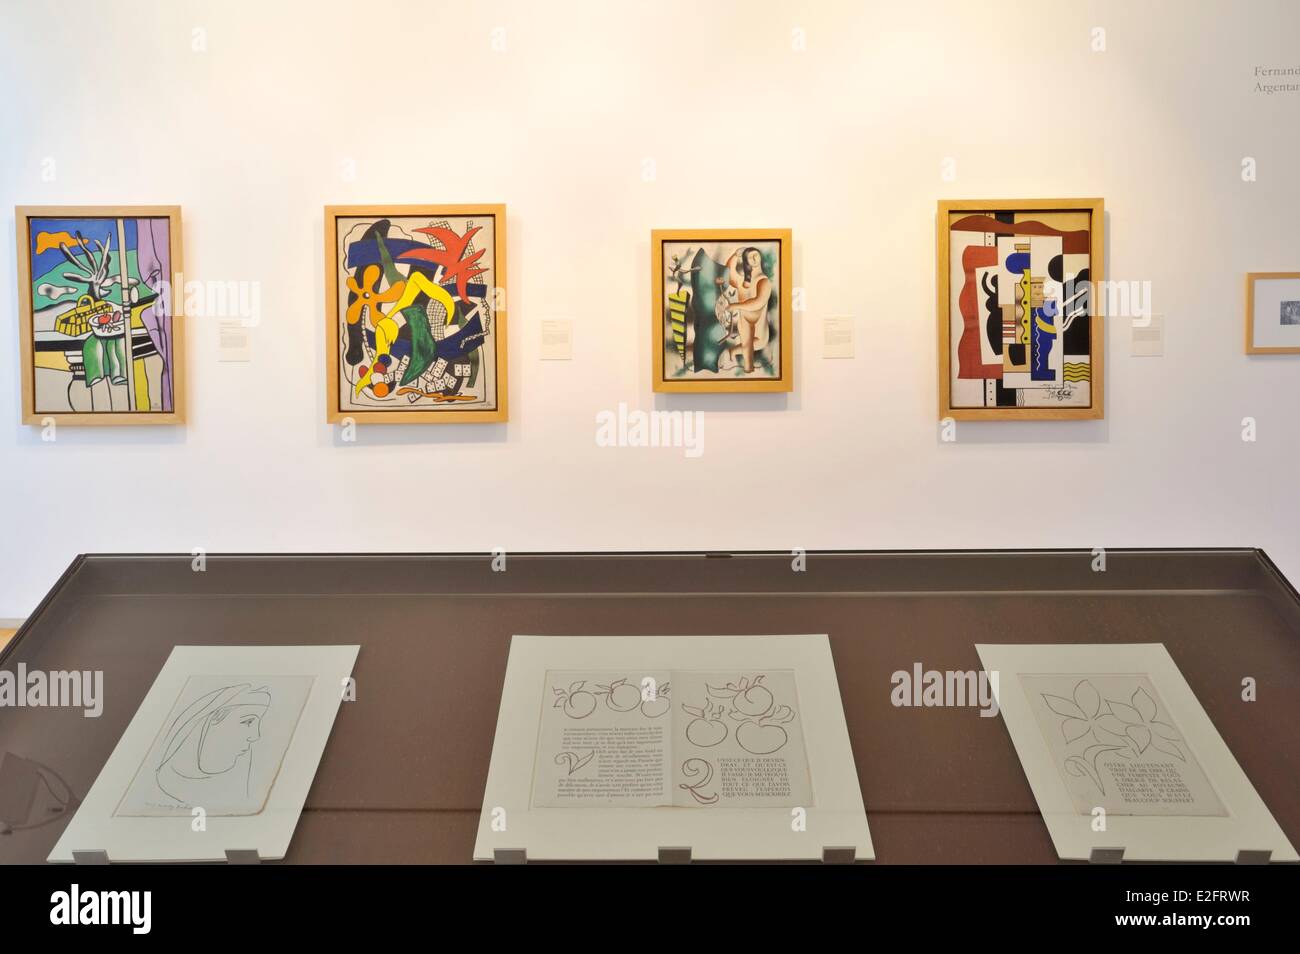 France Nord Le Cateau Cambresis Palais Fenelon Musee Matisse Teriade's  collection Fernand Leger paintings Stock Photo - Alamy